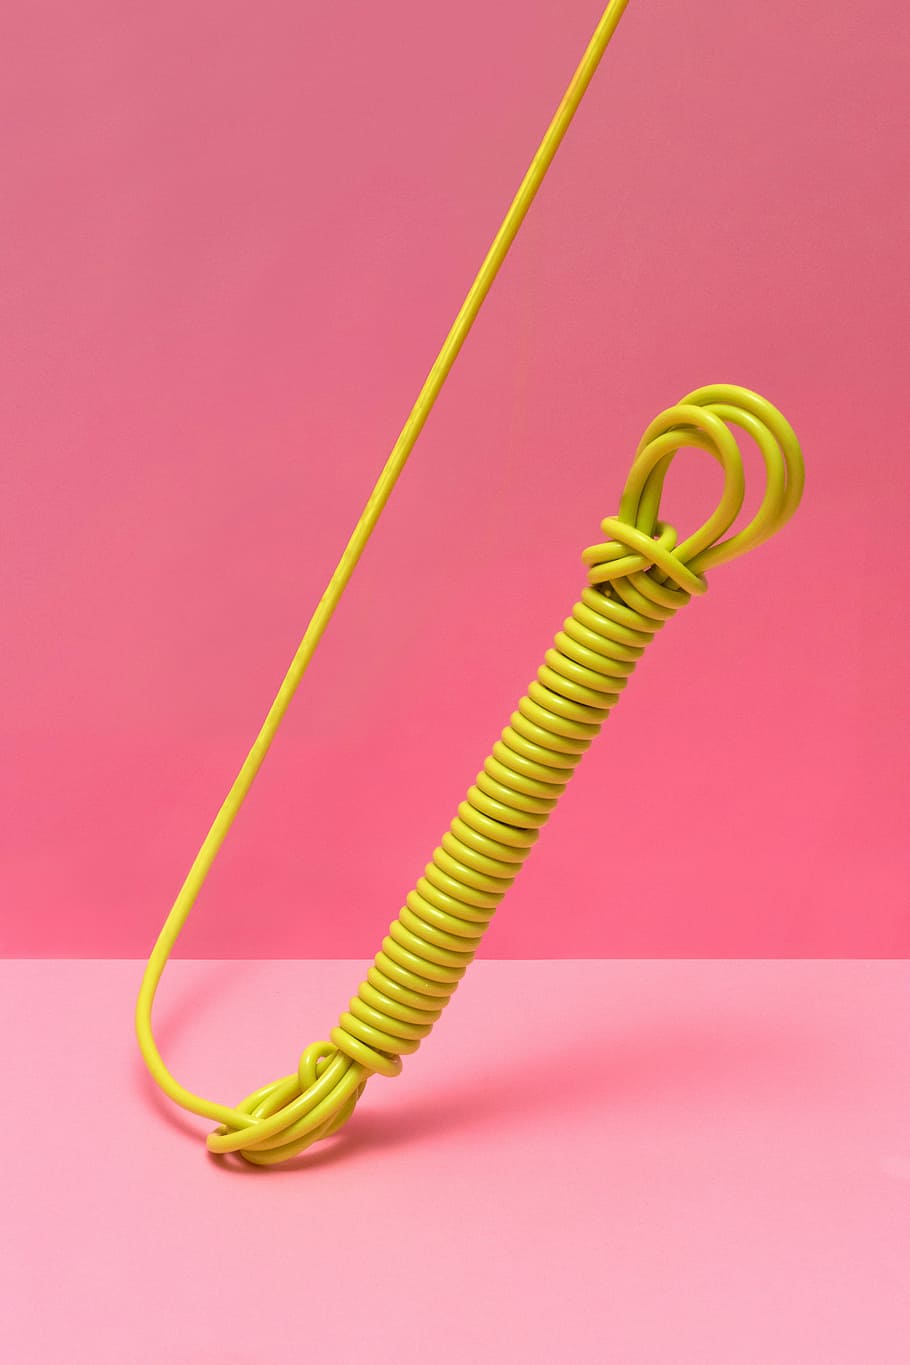 yellow, wire, pink, surface, electrical, cord, background, flexible, studio shot, colored background